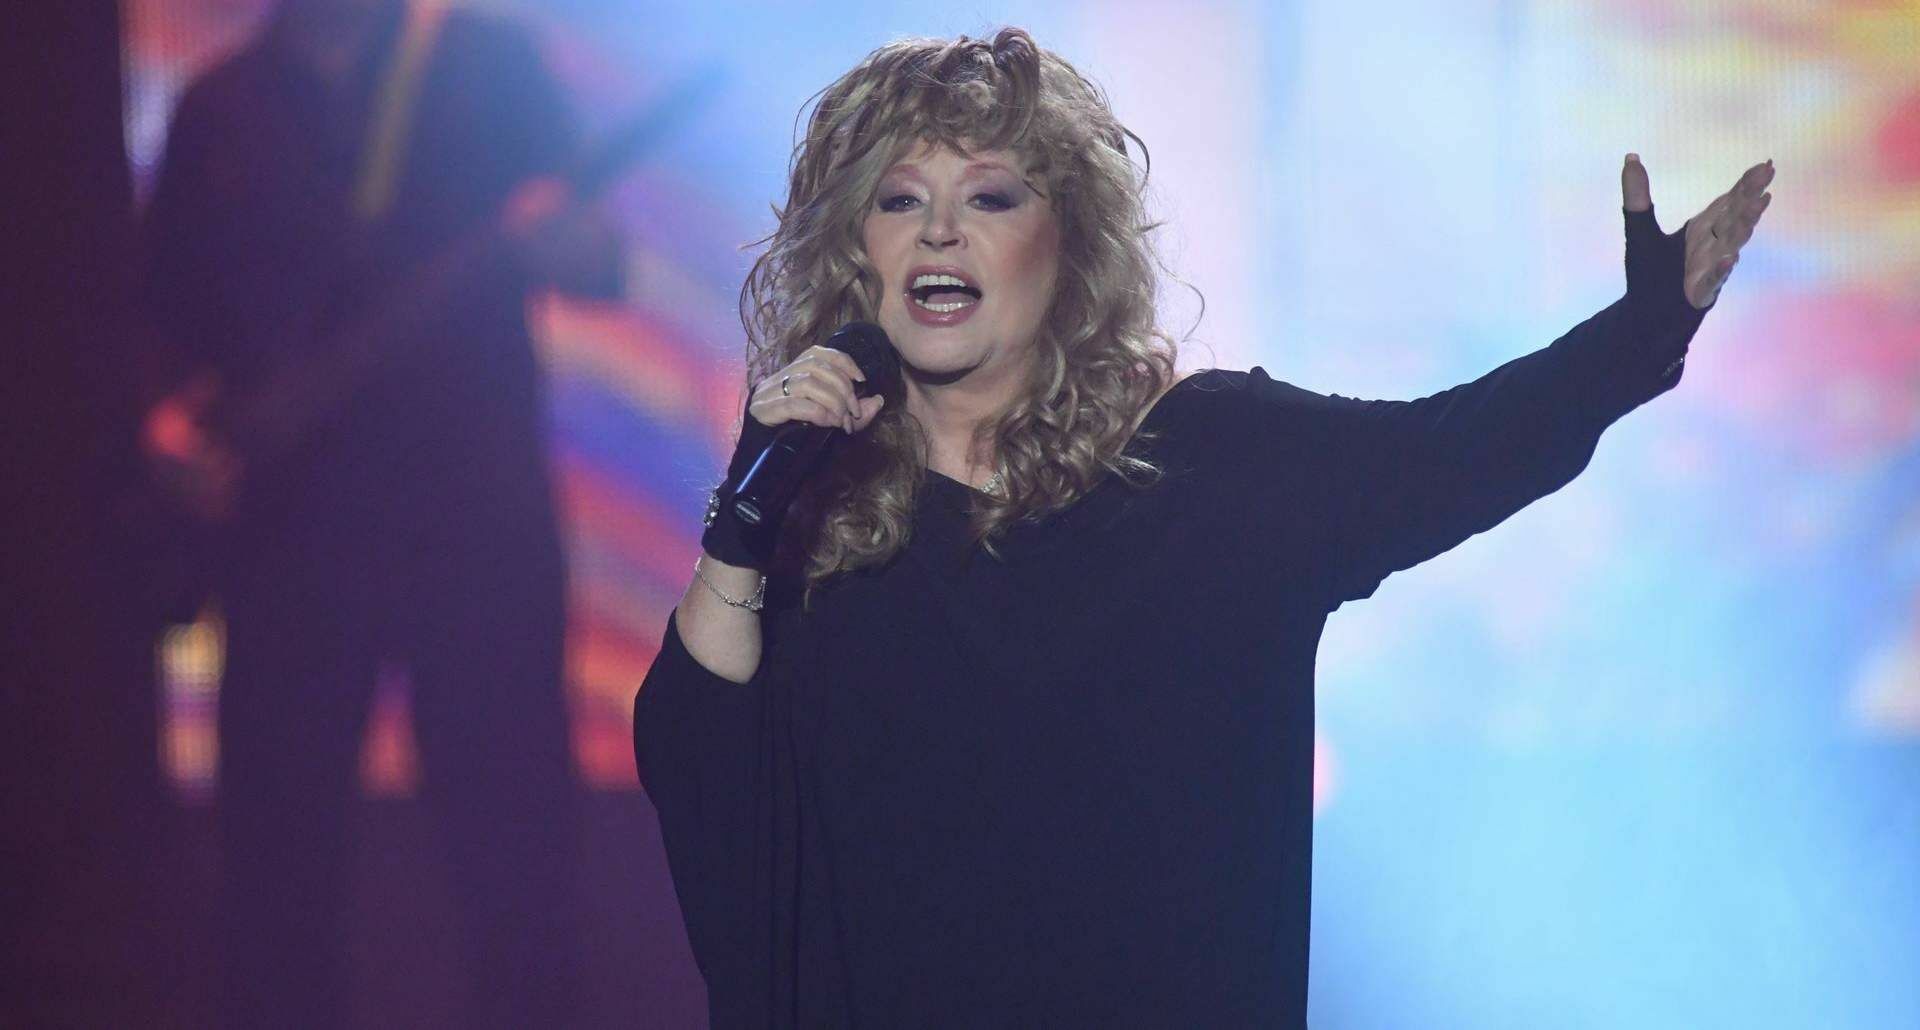 Question of the Day: isn't it dangerous now to listen to Alla Pugacheva's songs in Russia?